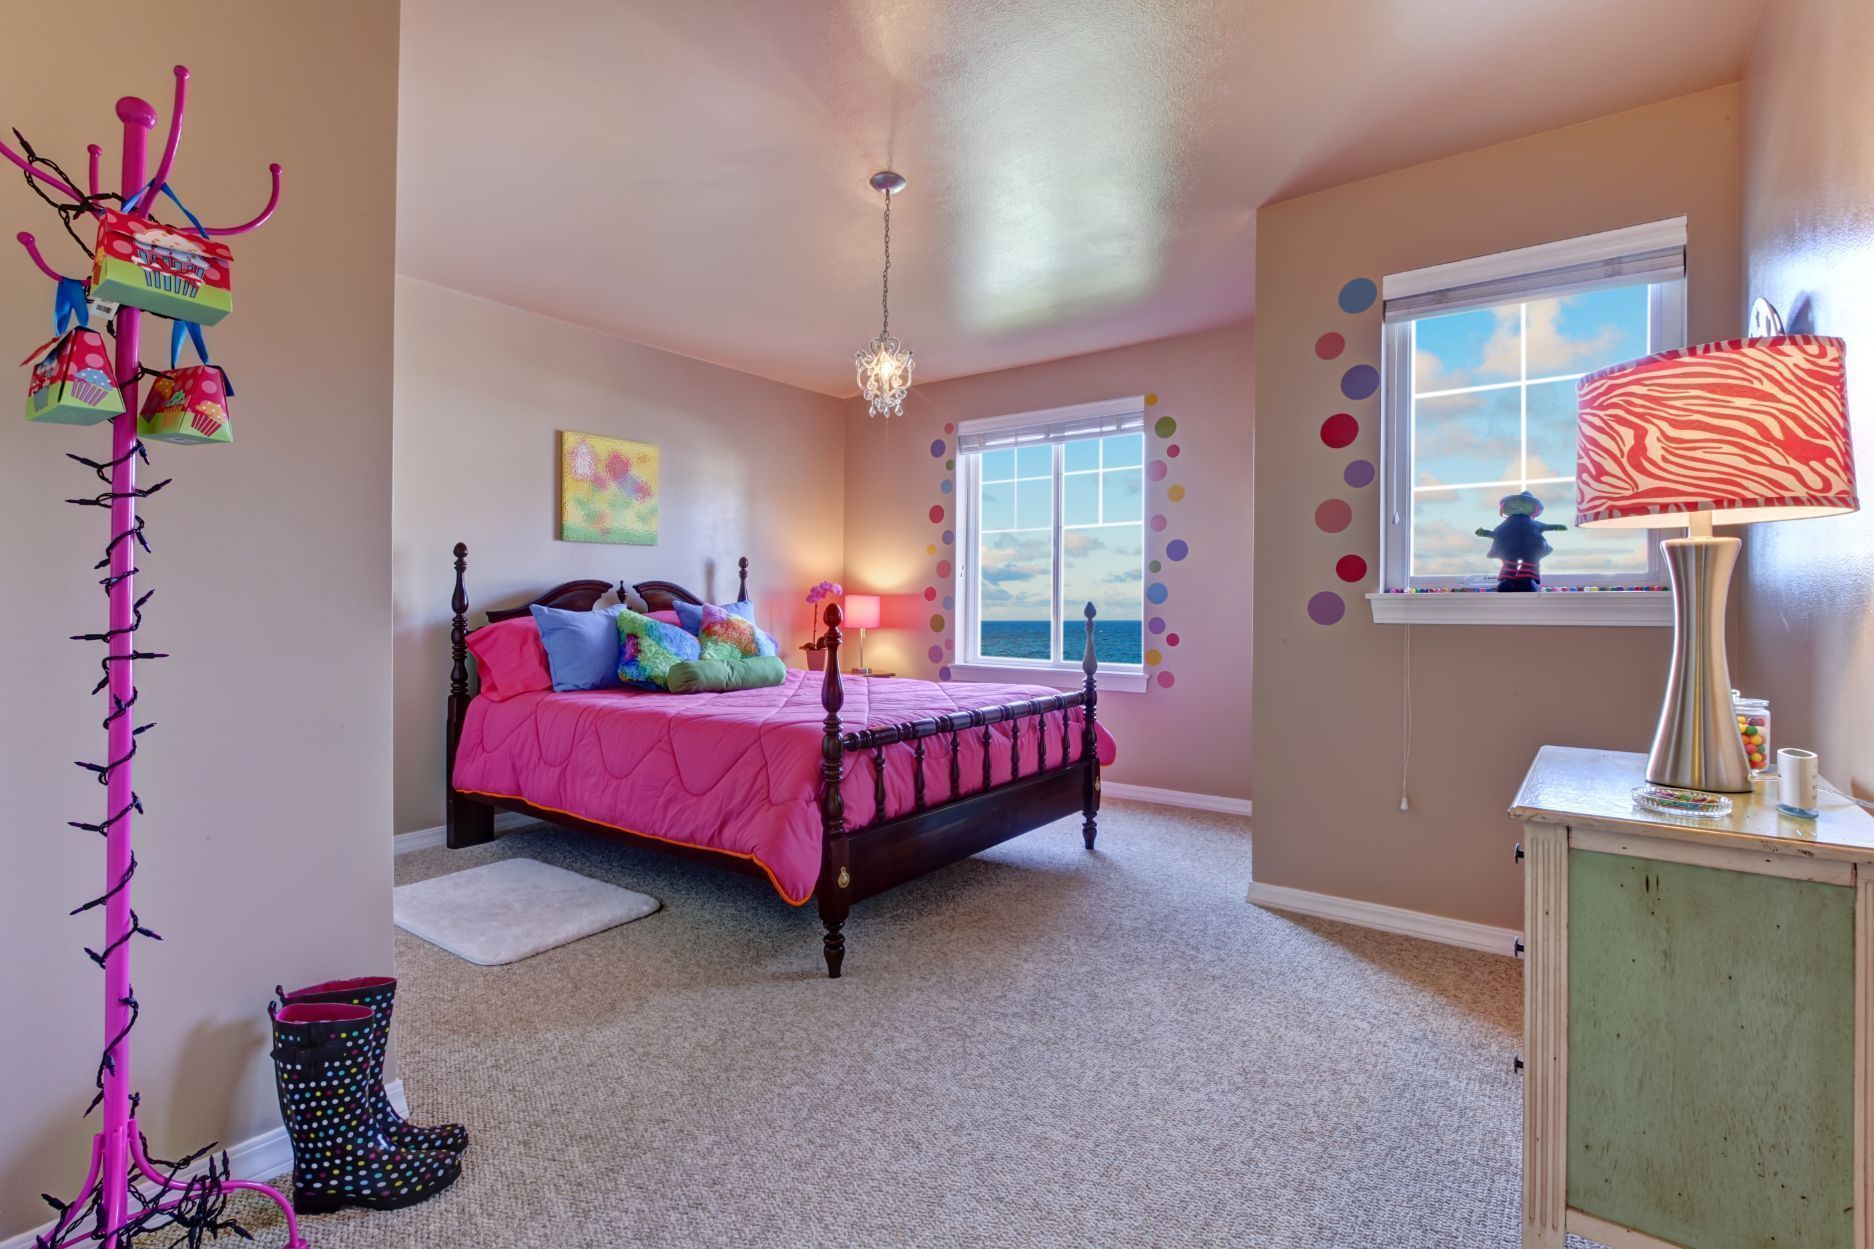 Teenage girls bedroom ideas: 23 options for every budget